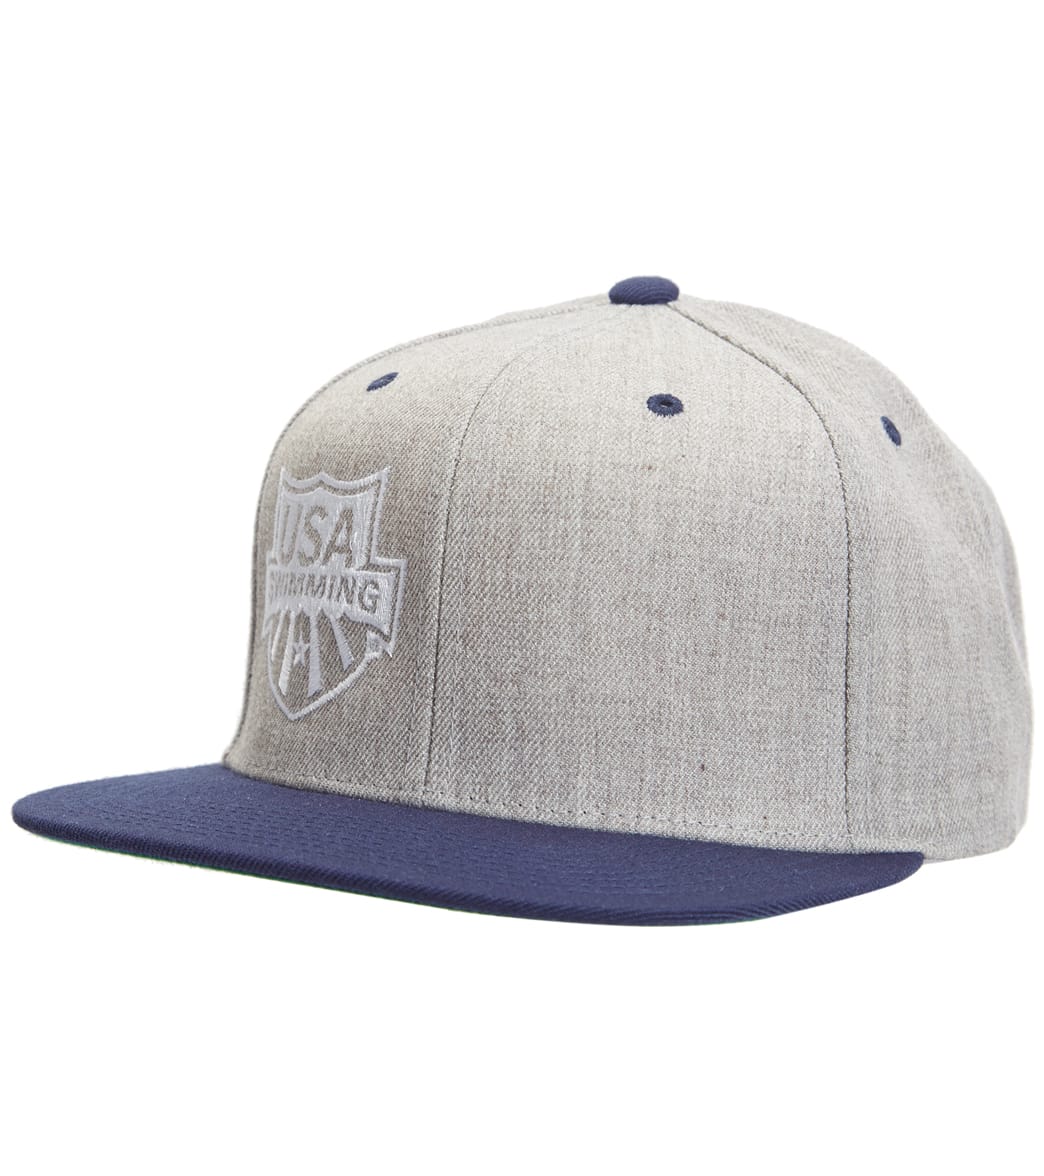 Usa Swimming Snapback Cap - Grey One Size - Swimoutlet.com